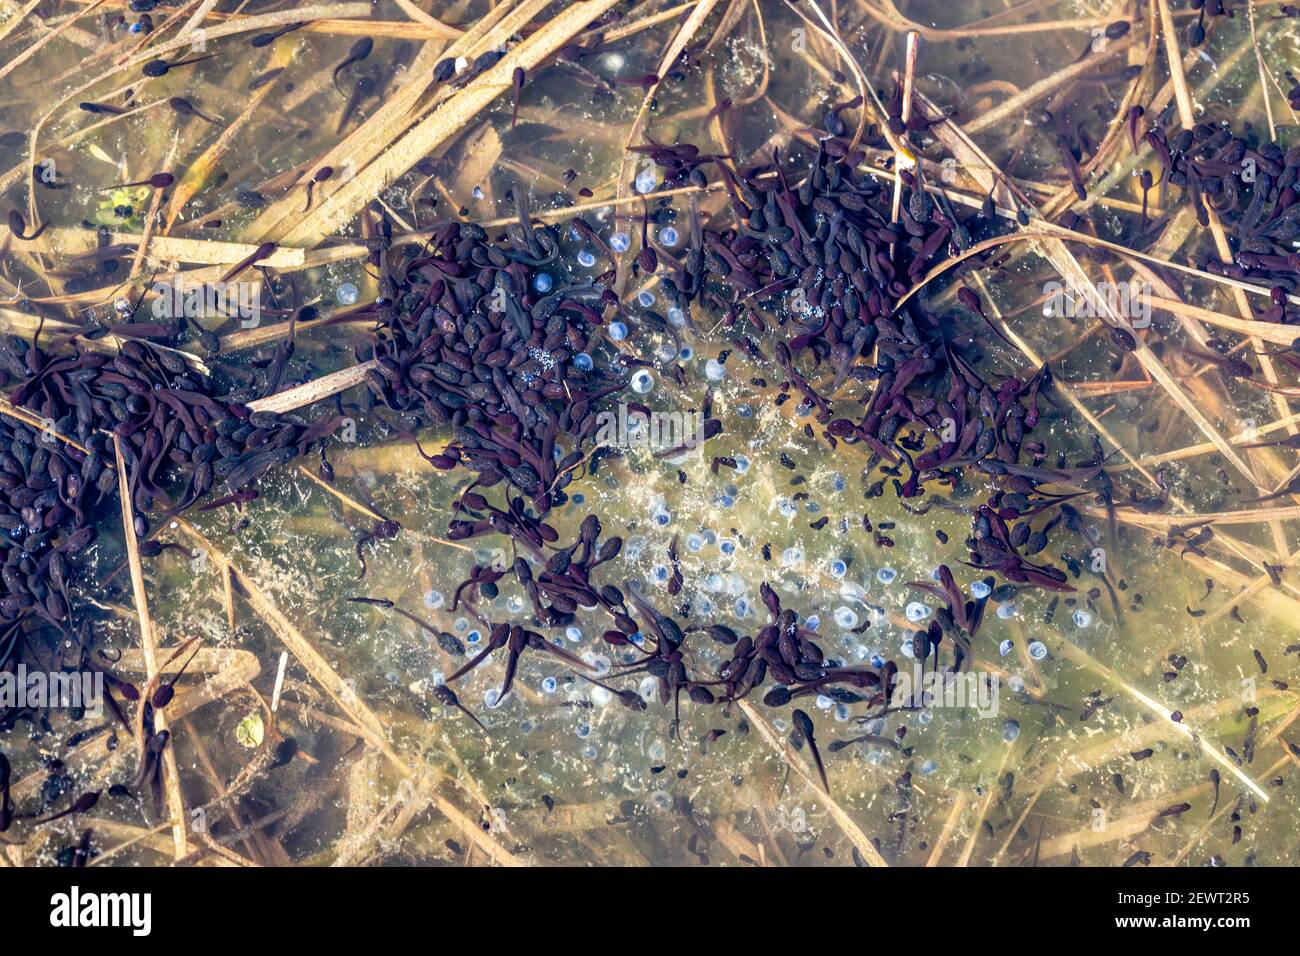 Clusters of tadpoles growing in a stagnant puddle, County Kerry, Ireland Stock Photo